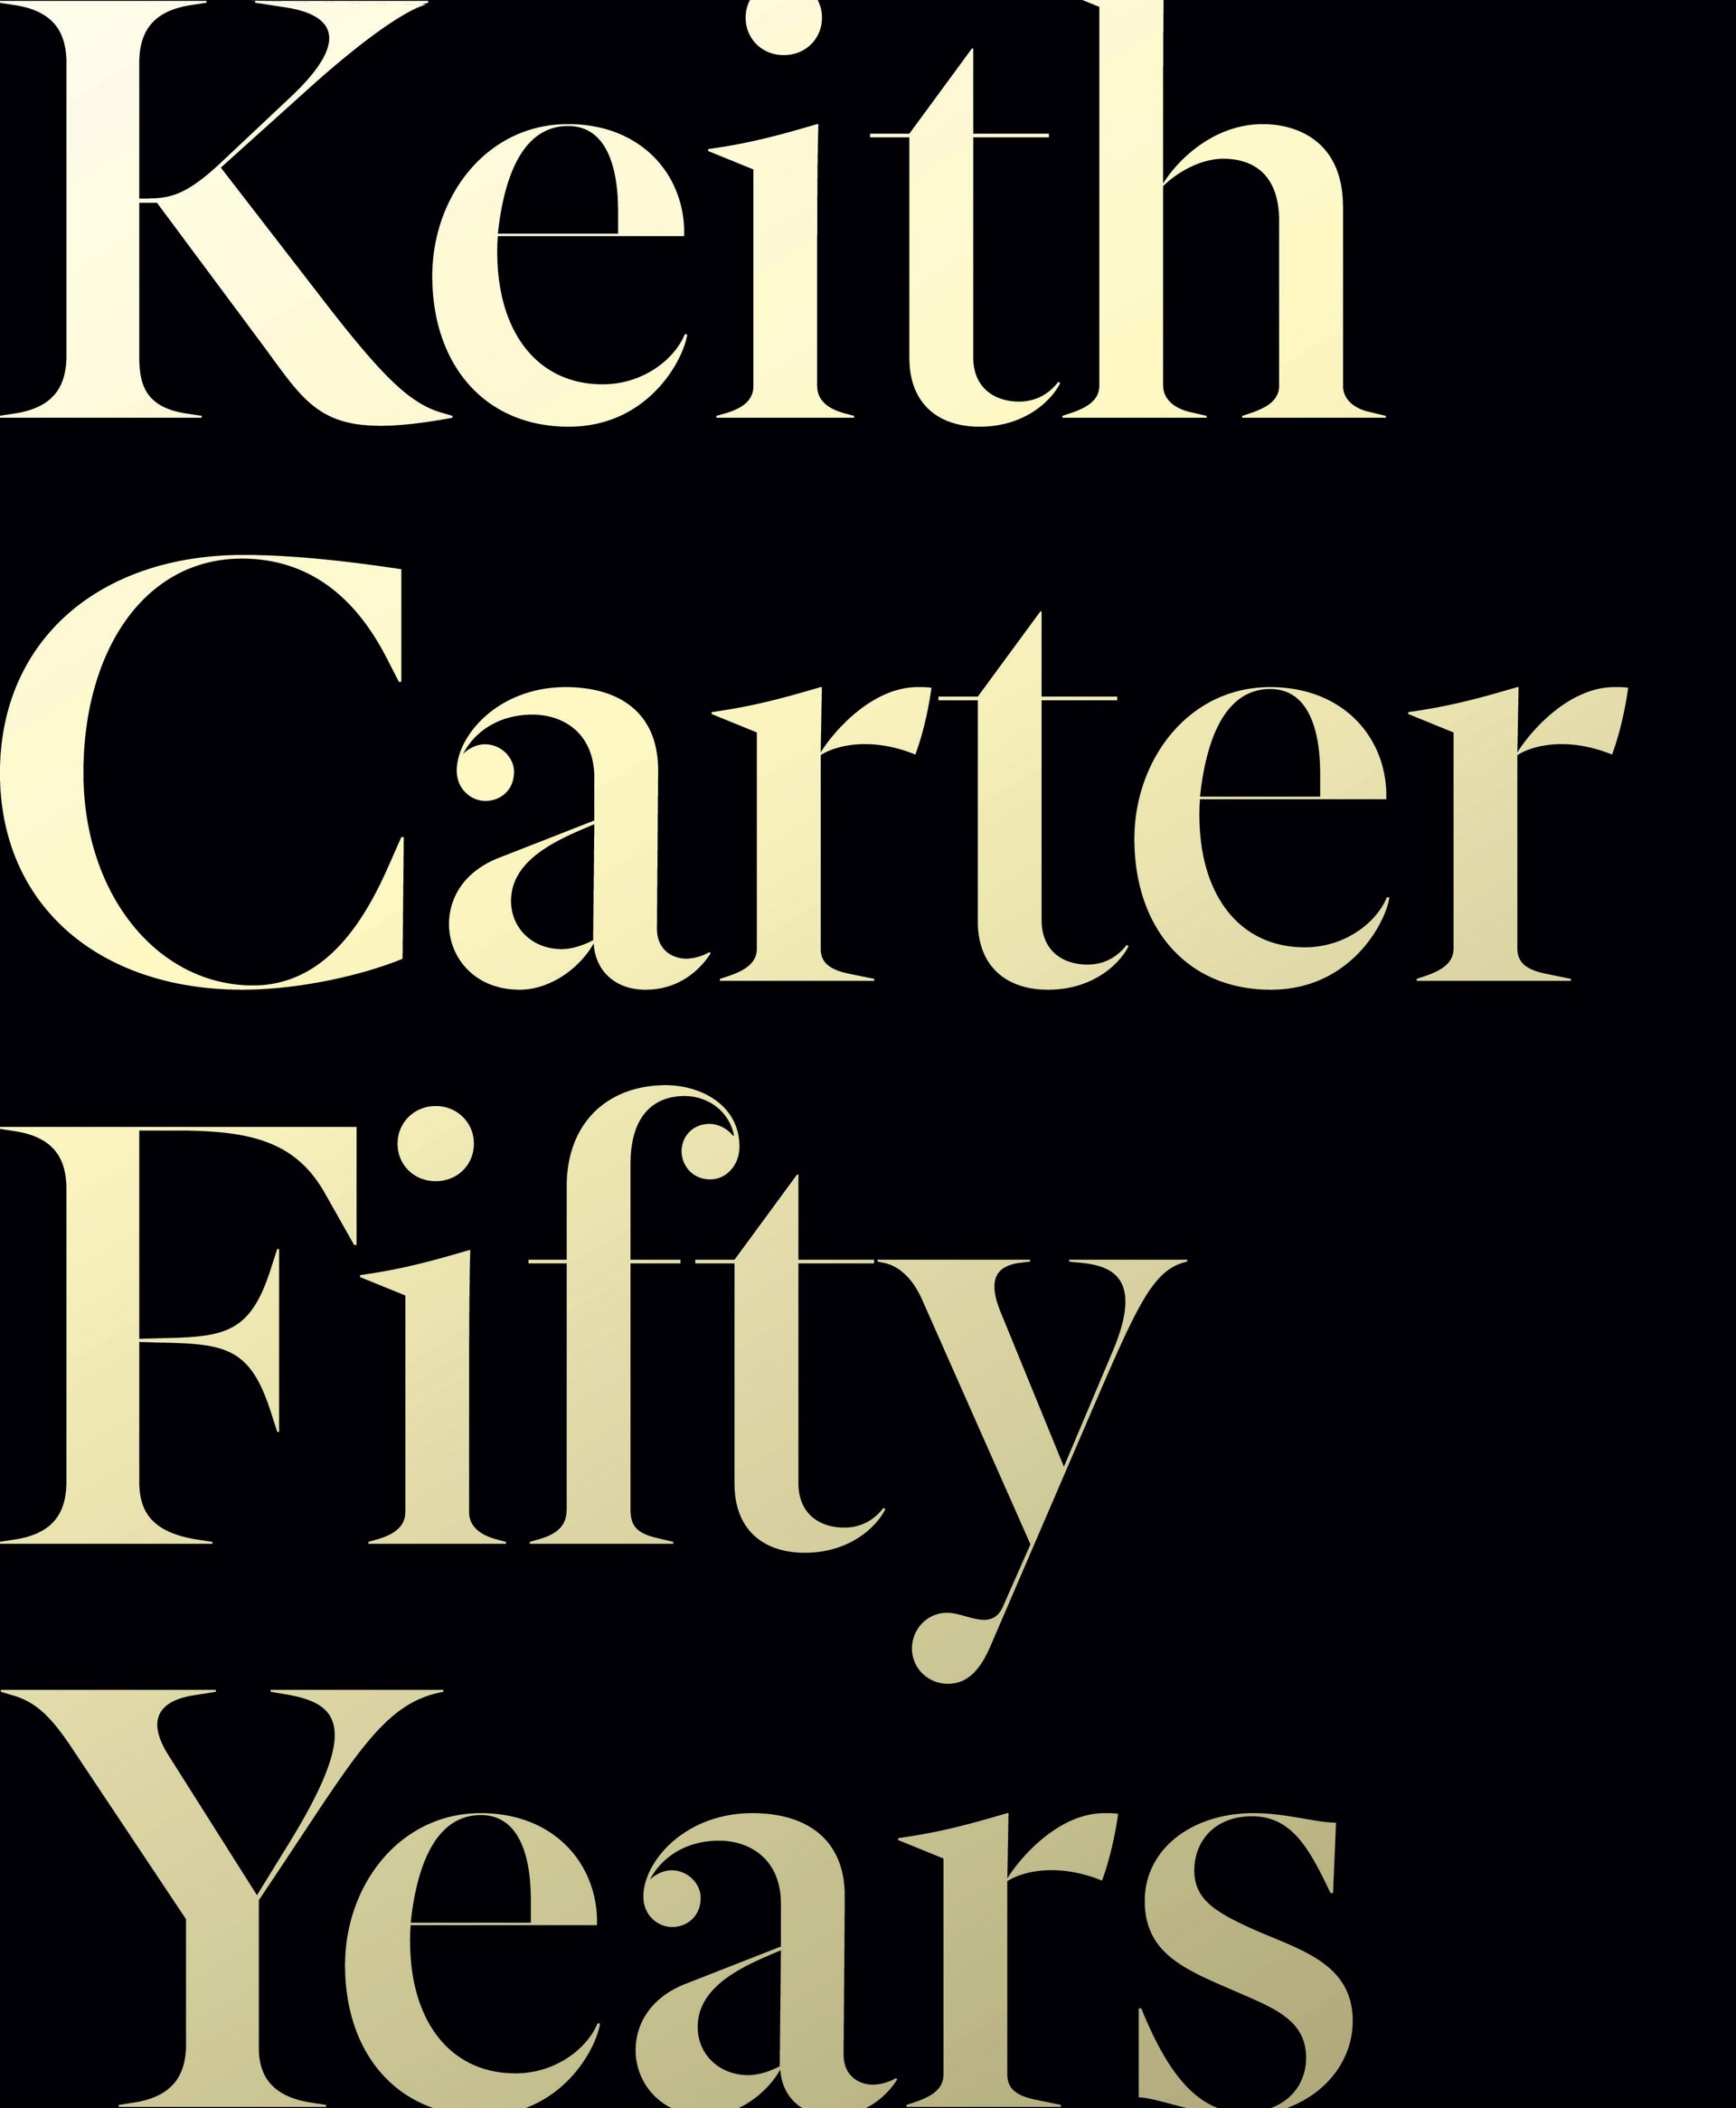 Keith Carter: Fifty Years by Keith Carter by Publications